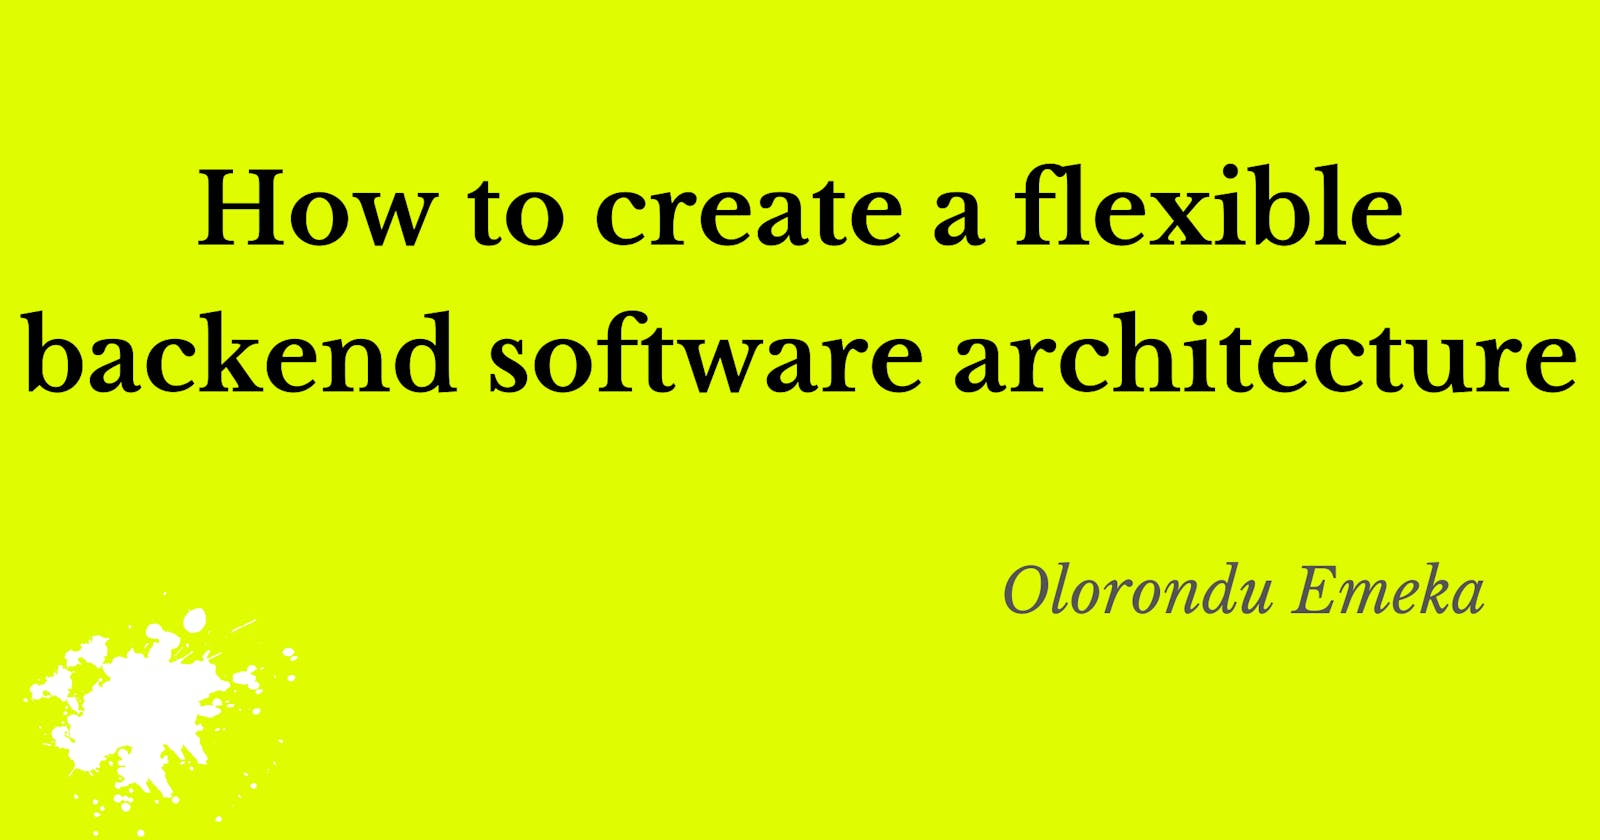 How to create a flexible backend software architecture.